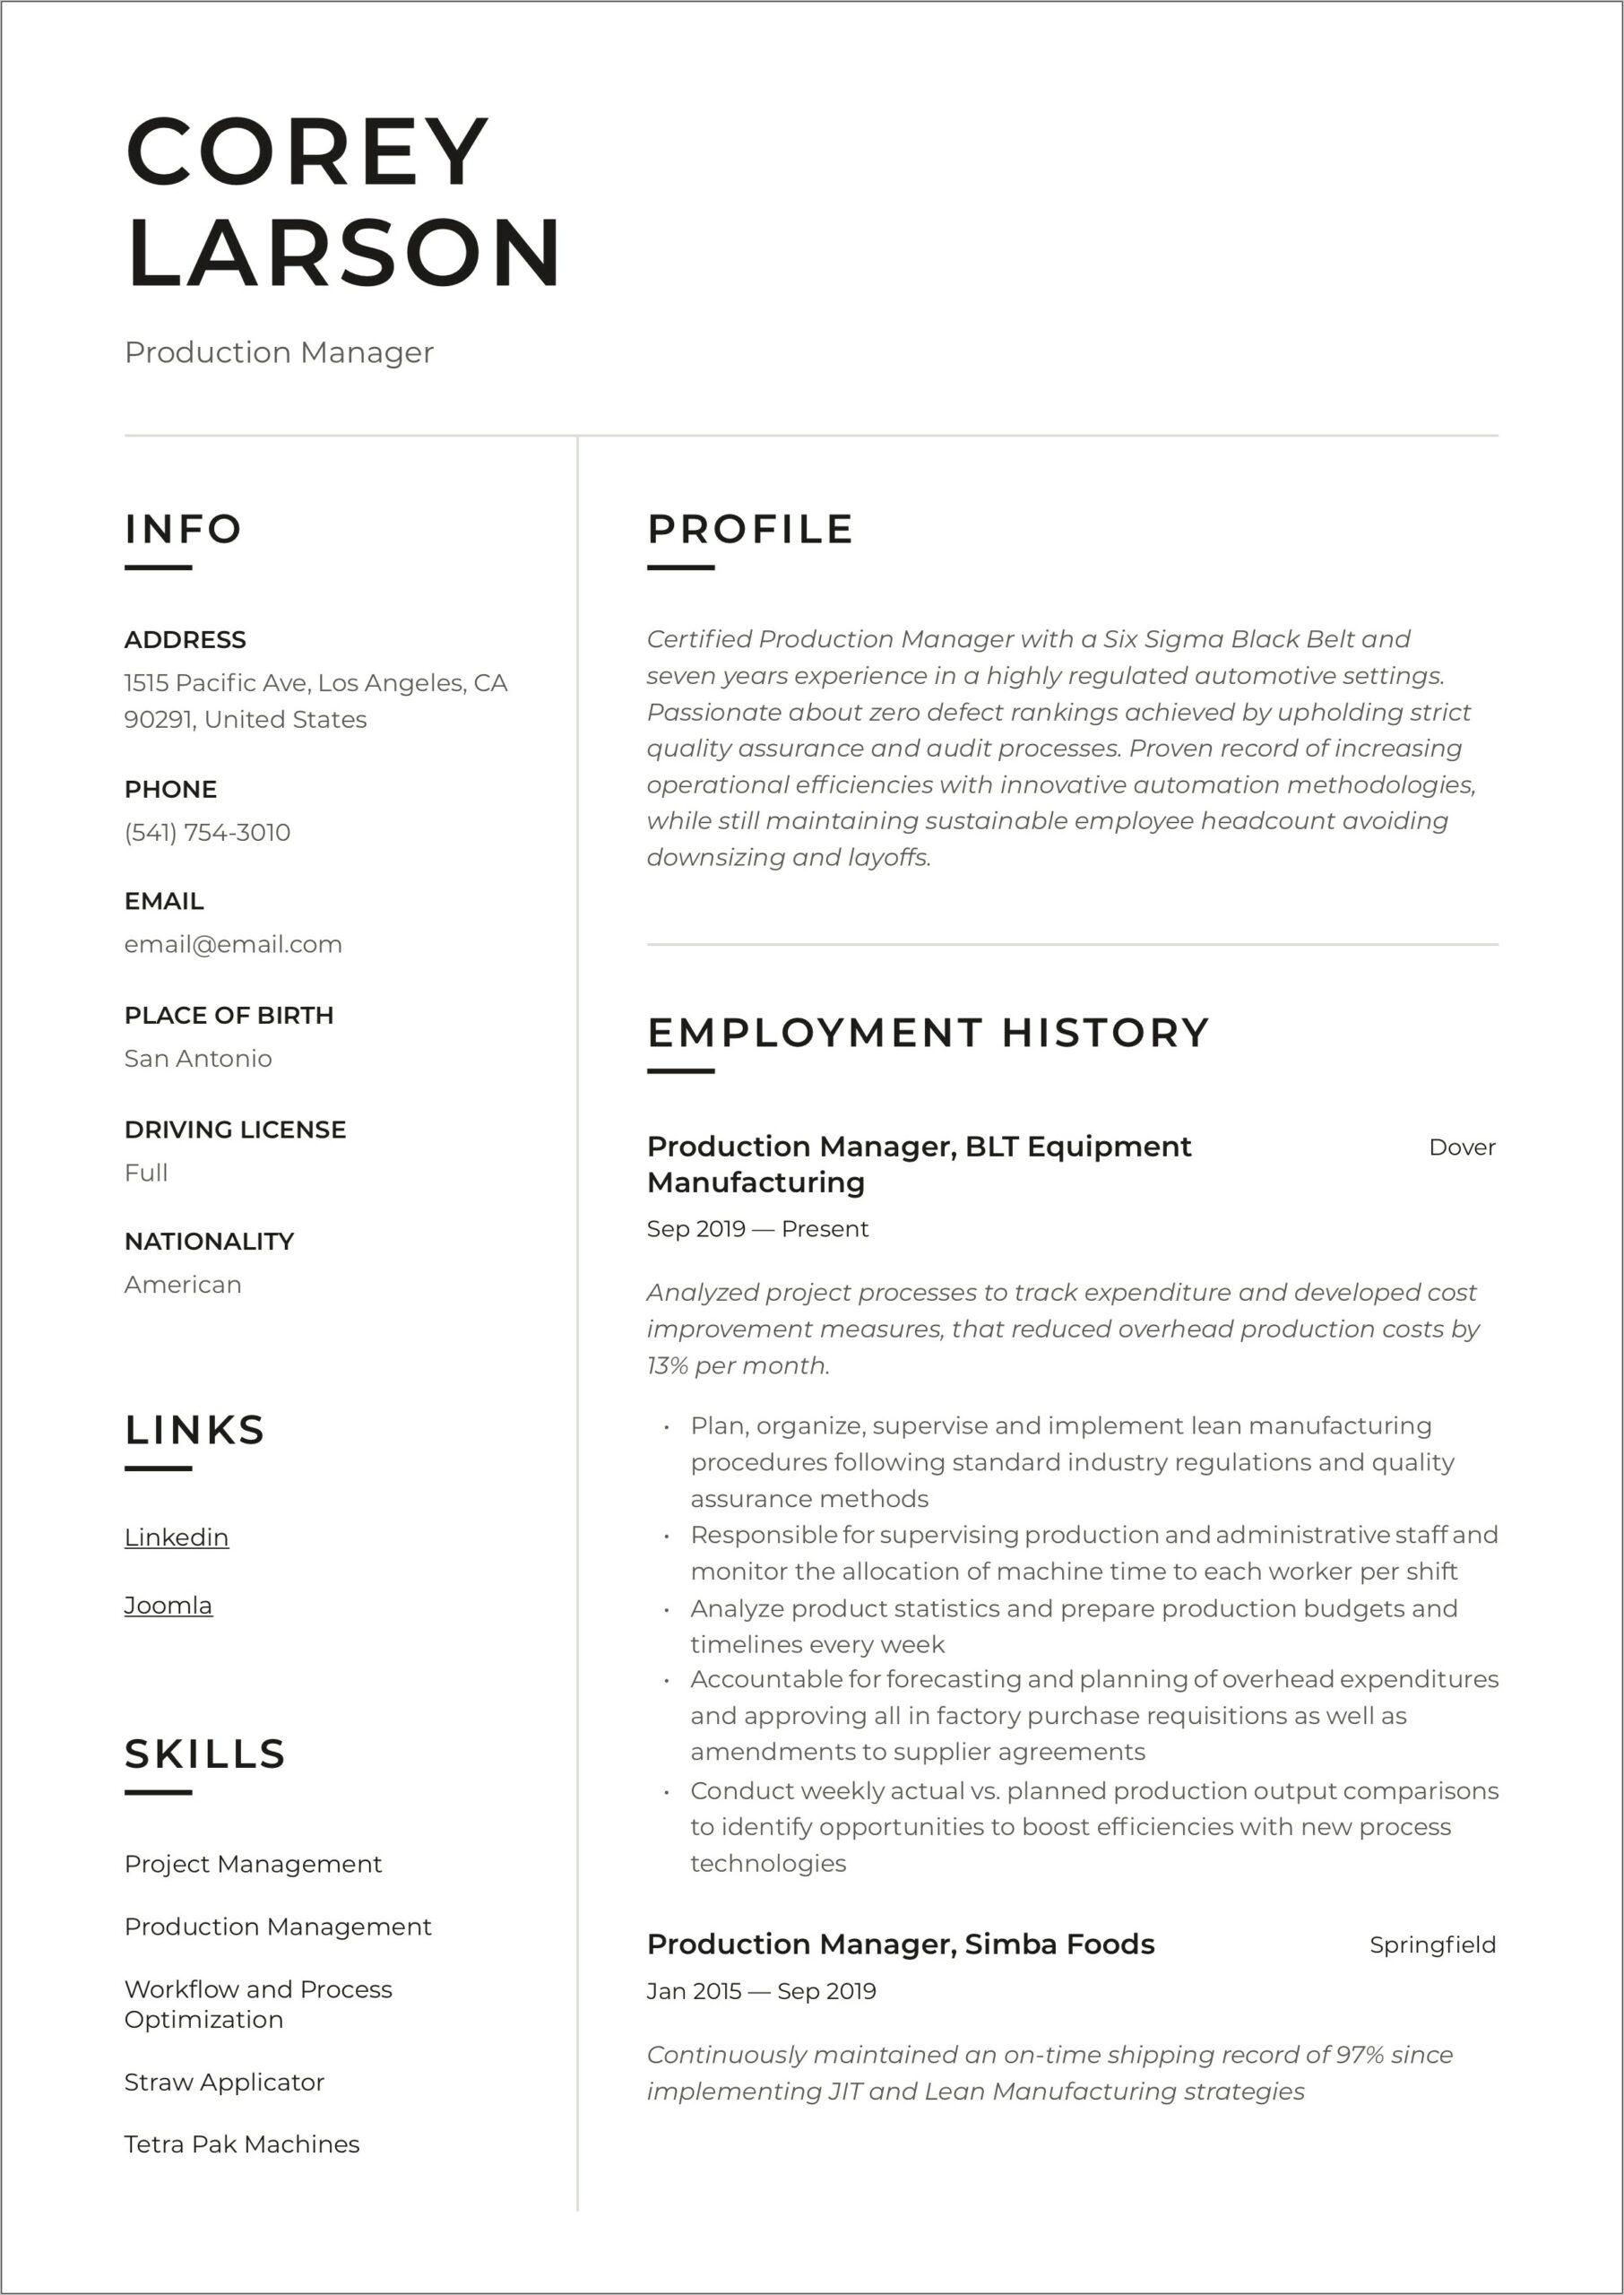 Resume For Assistant Production Manager